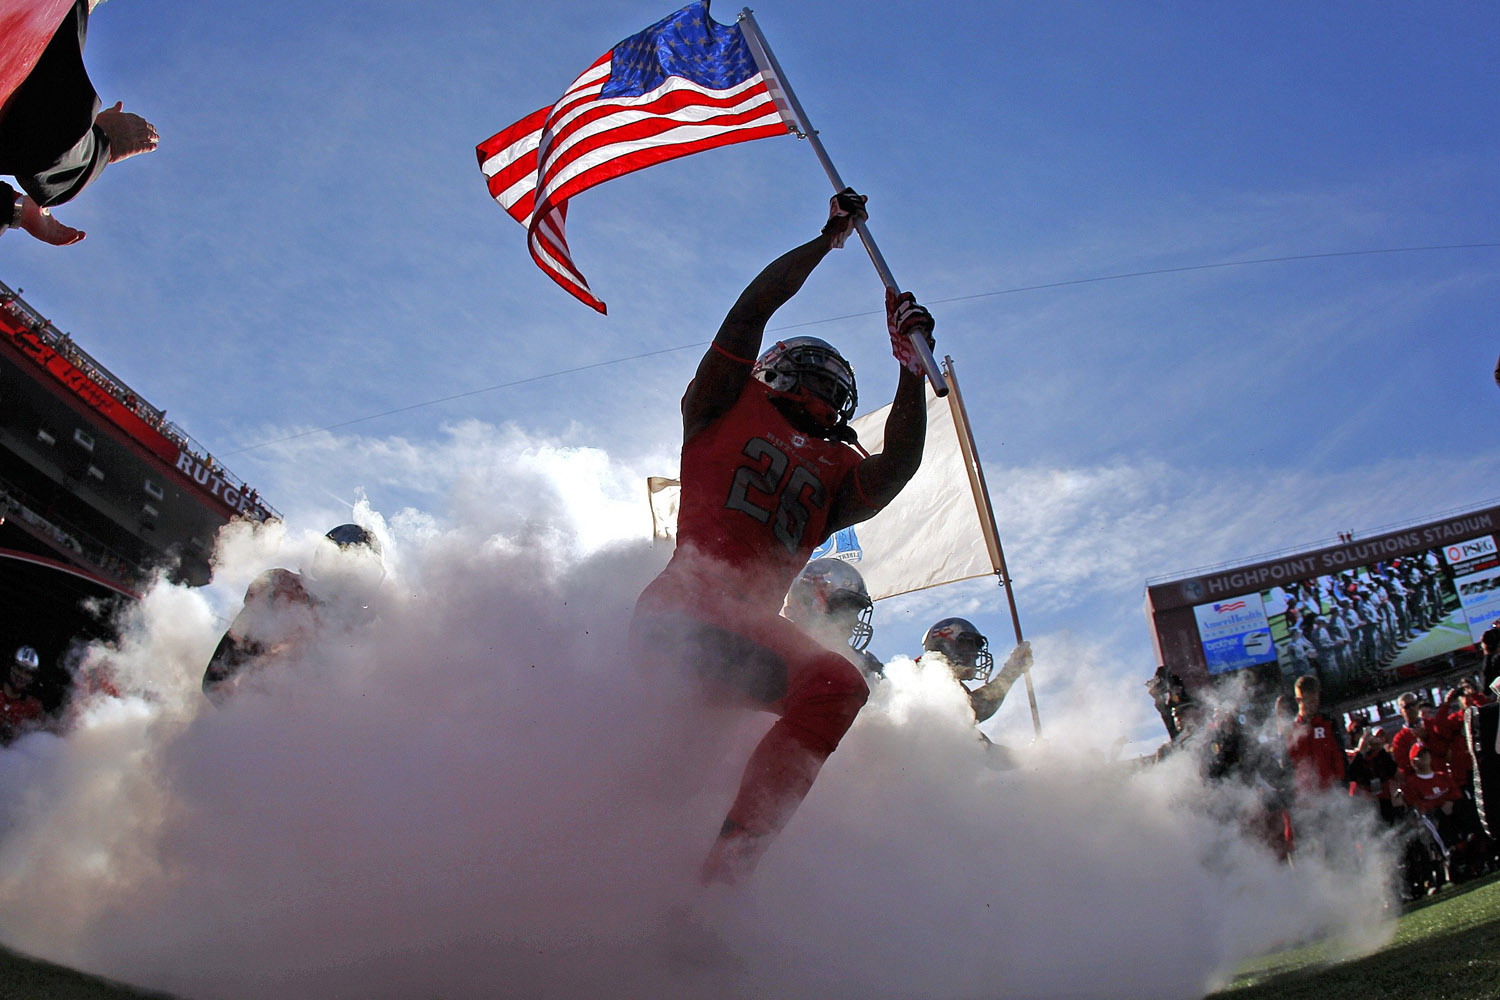 Nov. 16, 2013. Johnathan Aiken #26 of the Rutgers Scarlet Knights carries the American flag out as he leads his team onto the field before the start of their game against the Cincinnati Bearcats at High Point Solutions Stadium in Piscataway, N.J.